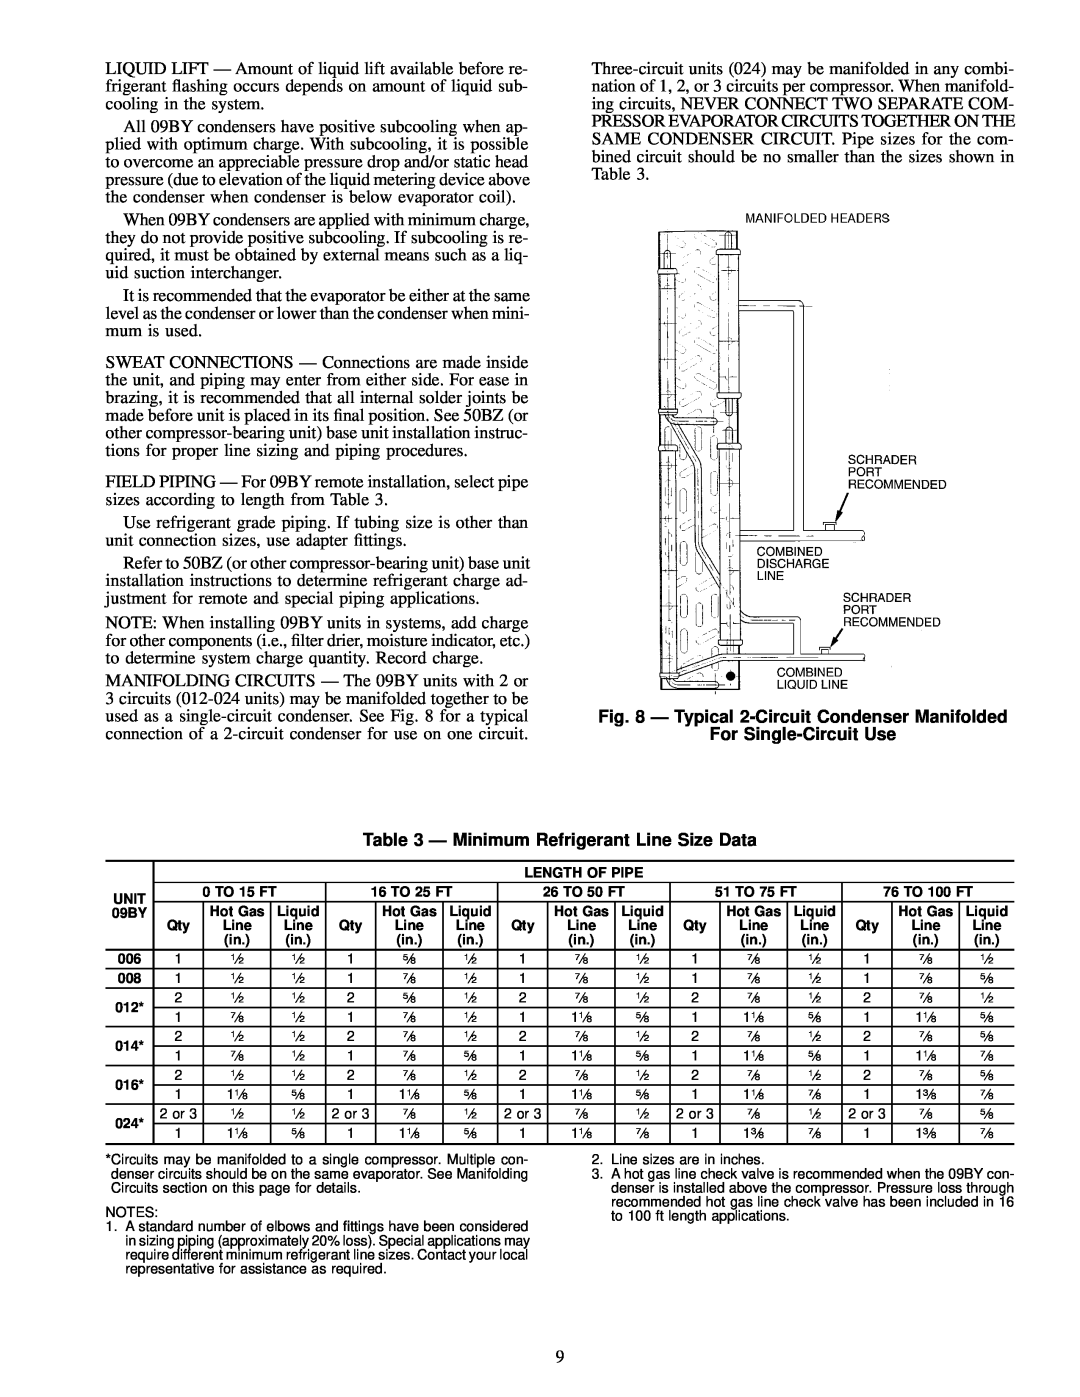 Carrier 09BY006-024 Ð Typical 2-Circuit Condenser Manifolded, For Single-Circuit Use, Ð Minimum Refrigerant Line Size Data 